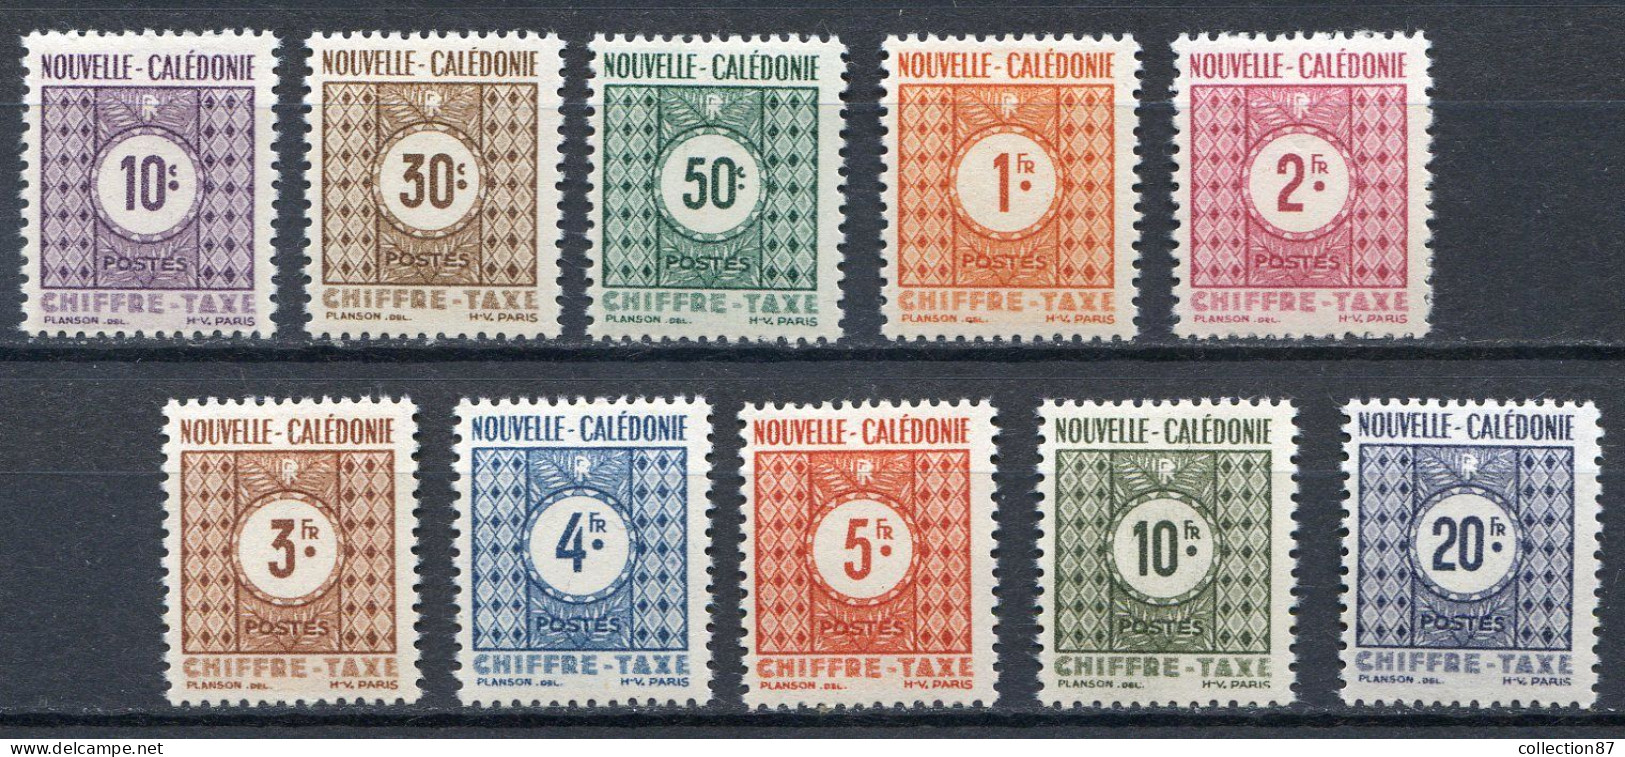 Réf 78 < NOUVELLE CALEDONIE < Yvert TAXE N° 39 à 48 * MH * Neuf Ch < Cat 13 € - Postage Due